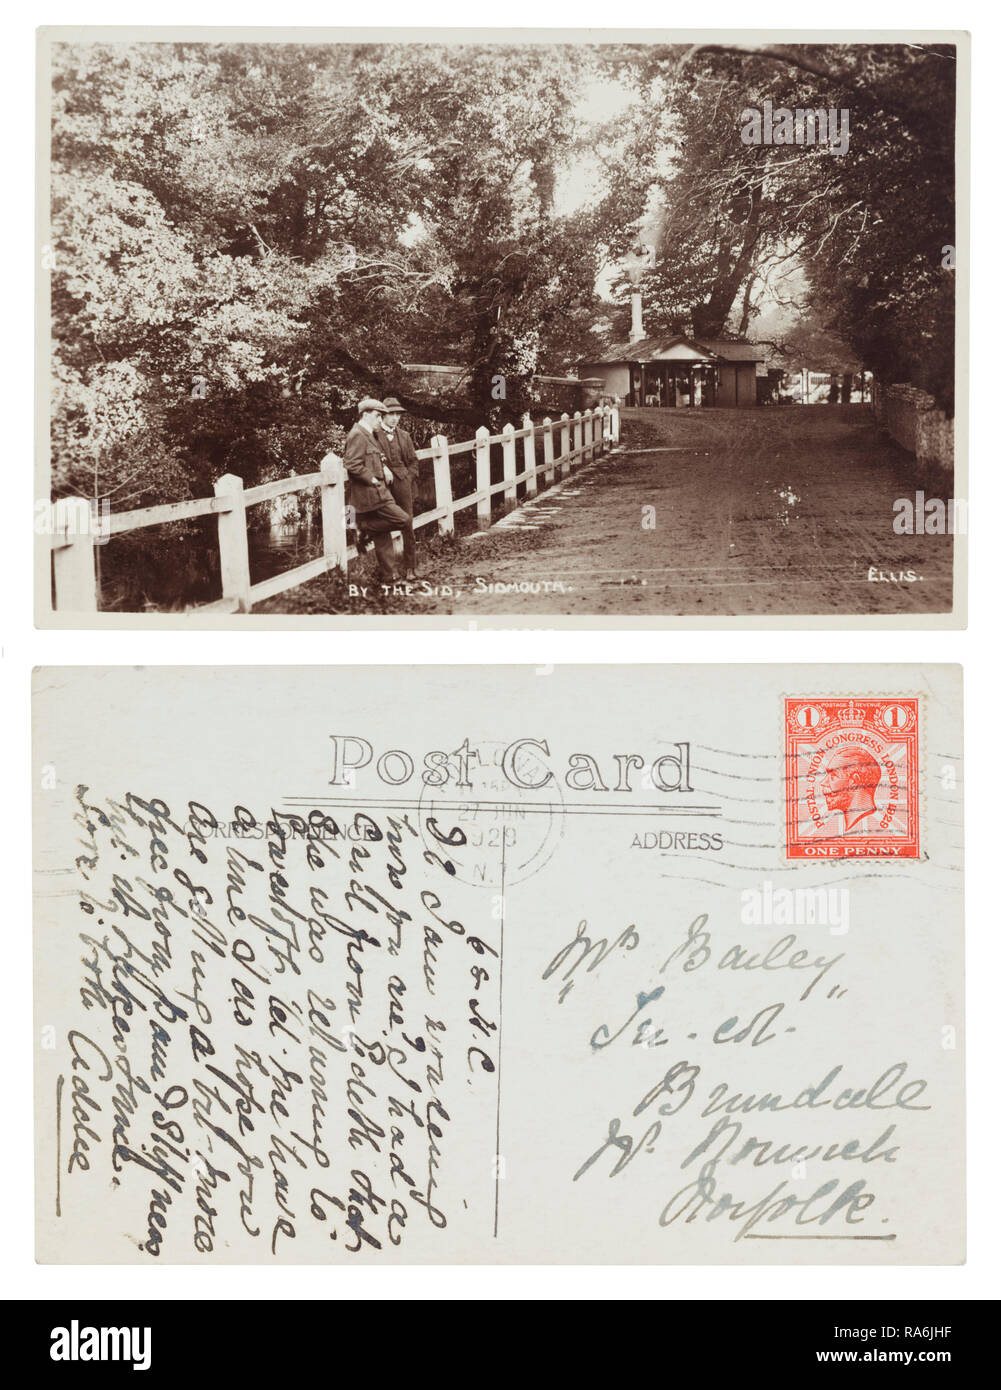 Postcard of the river Sid in Sidmouth from Addie to Mrs Bailey, Su col, Brundall, Norwich in June 1929 Stock Photo